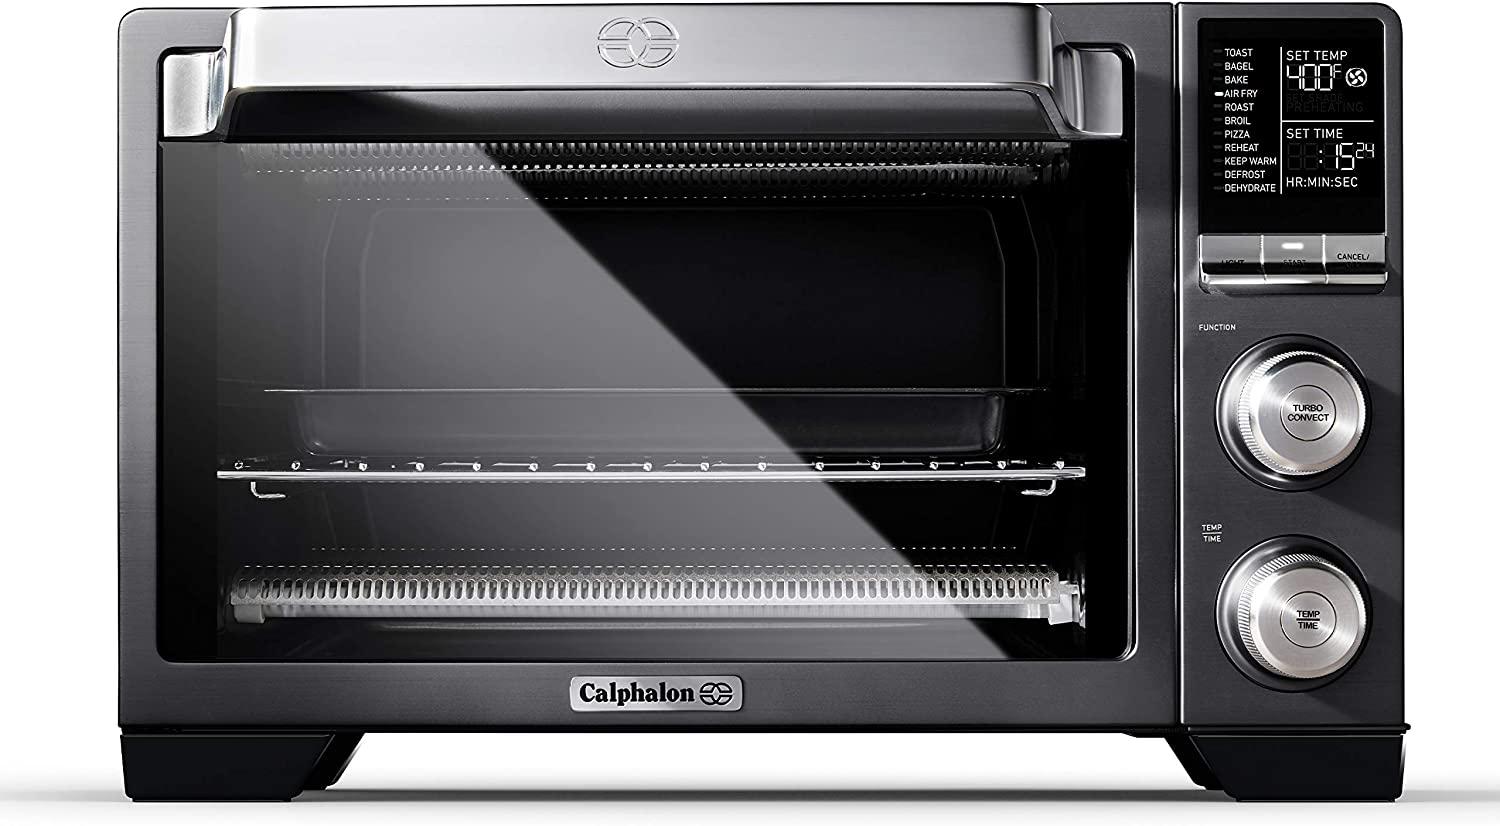 Calphalon Performance Air Fry Convection Oven, Countertop Toaster Oven for $169.99